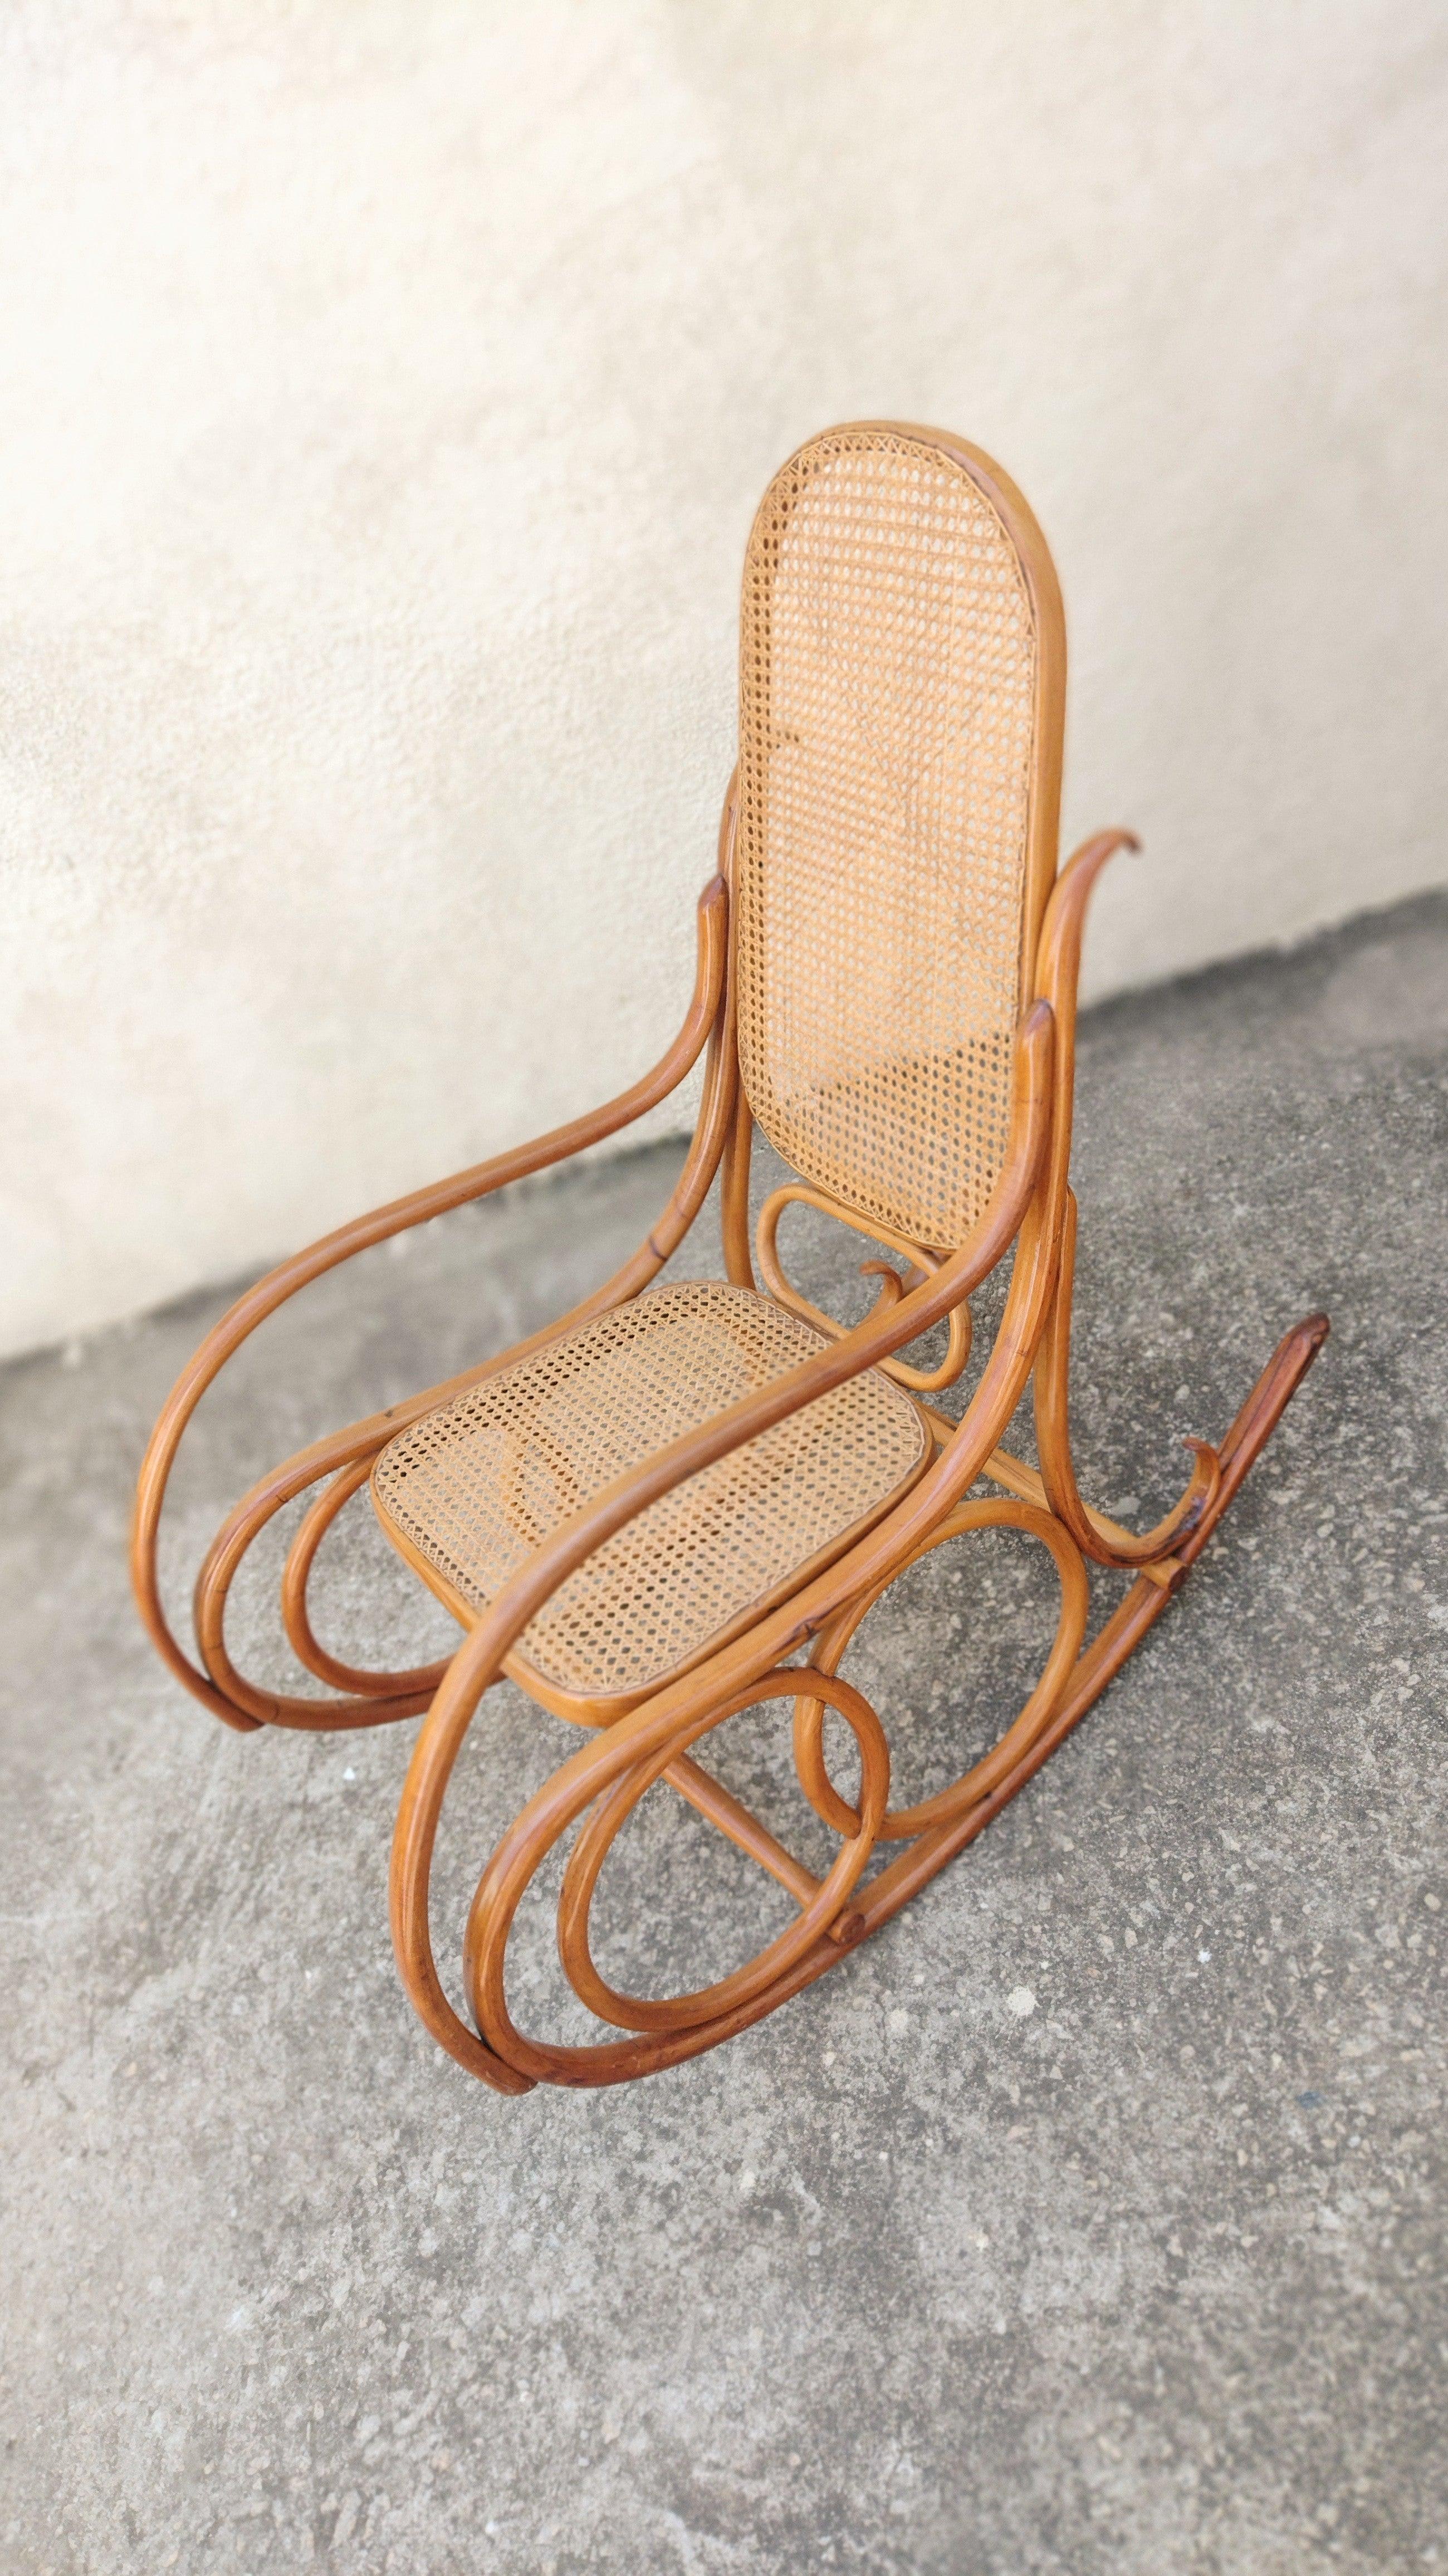 Brazilian Rocking Chair in Curved Wood and Indian Straw, 1960s For Sale 2